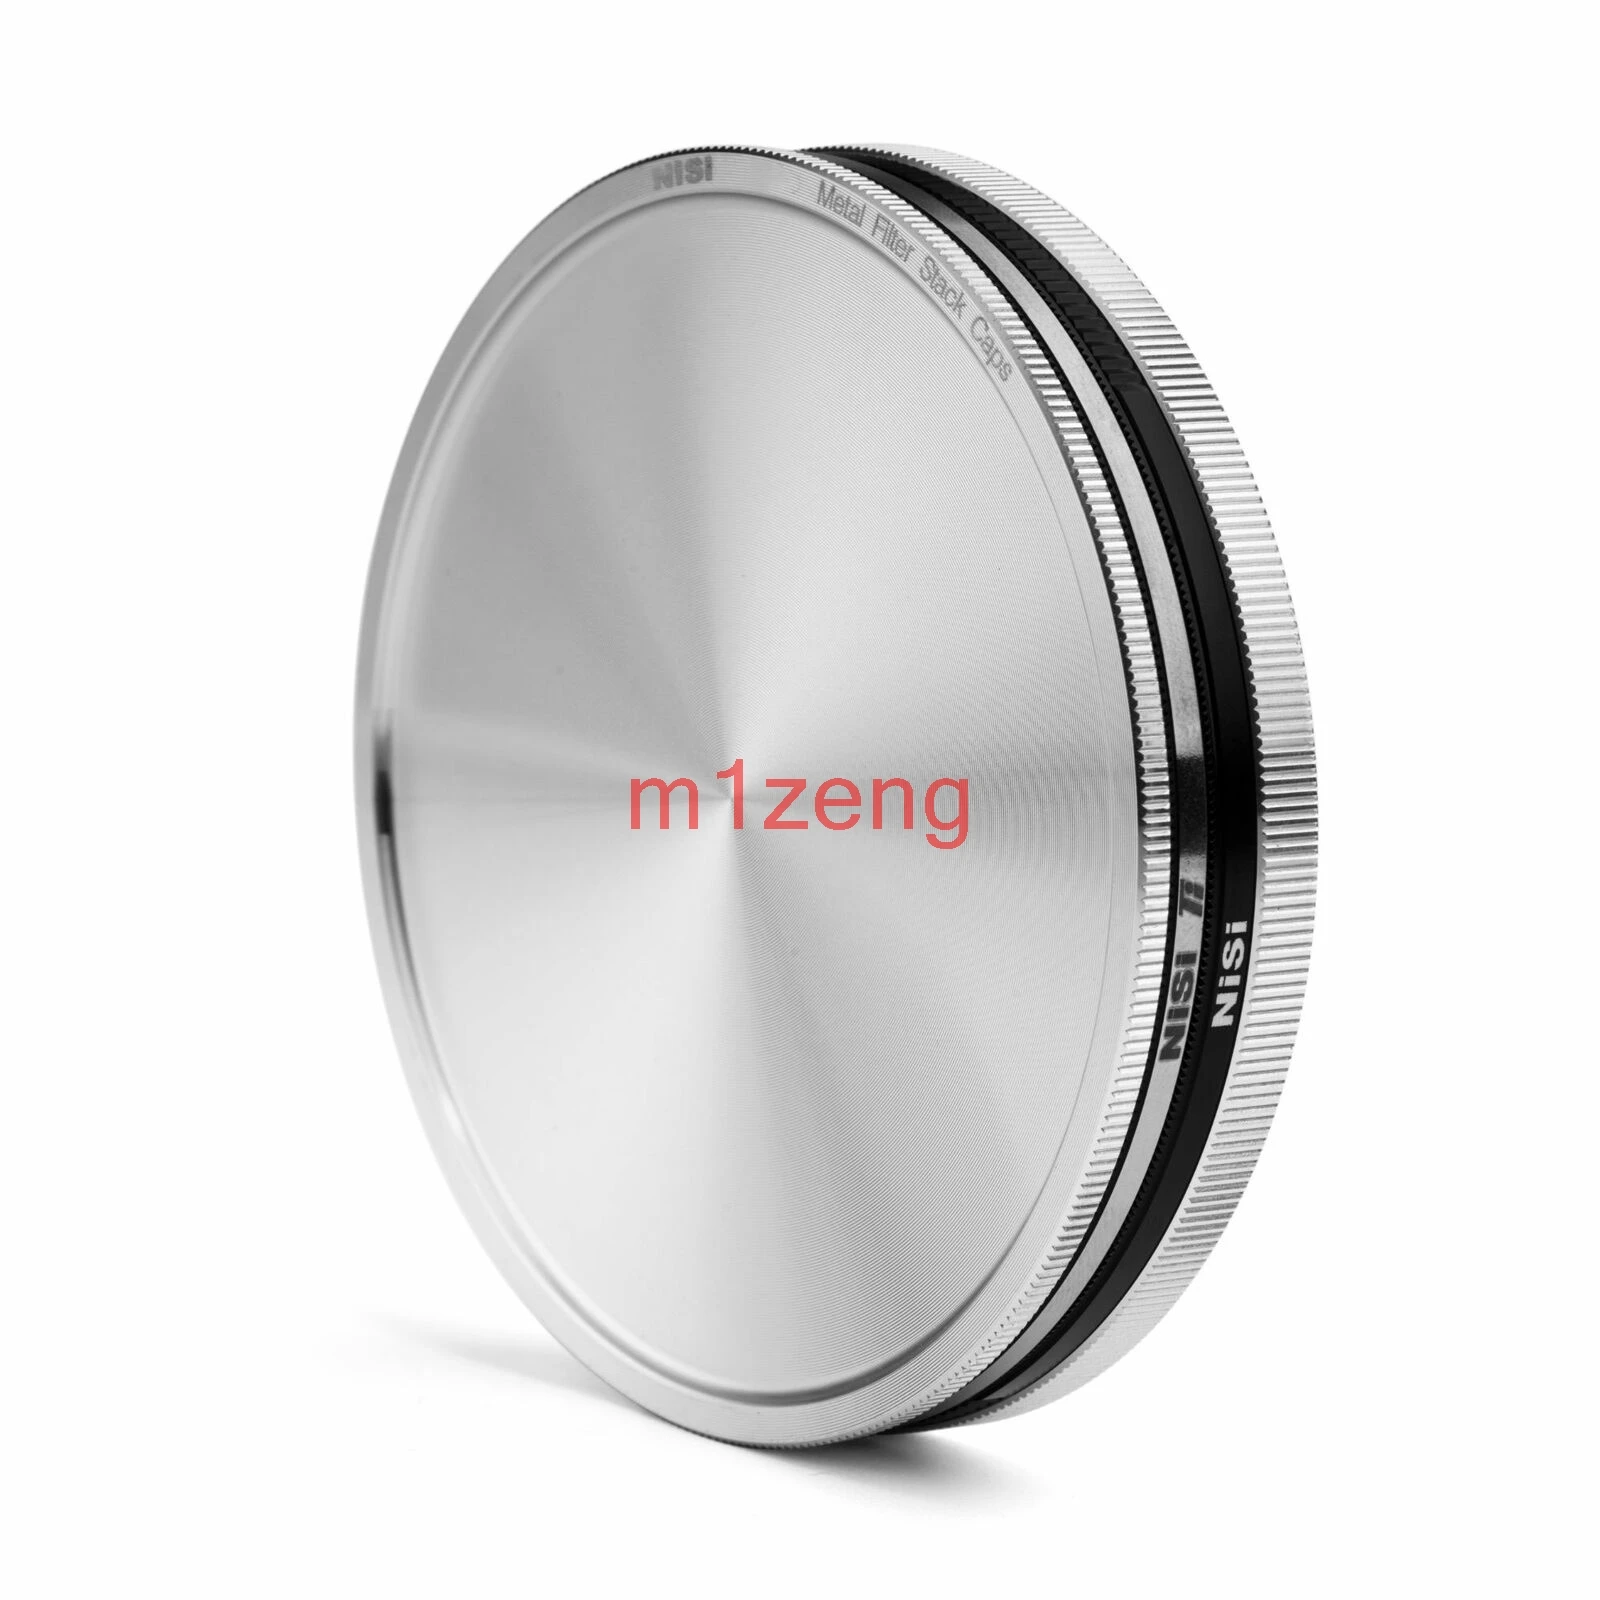 67 72 77 82 mm Metal cnc Filter Stack Cap Protector Protect Storage UV CPL ND Filters From Dust Scratches and fingerprints